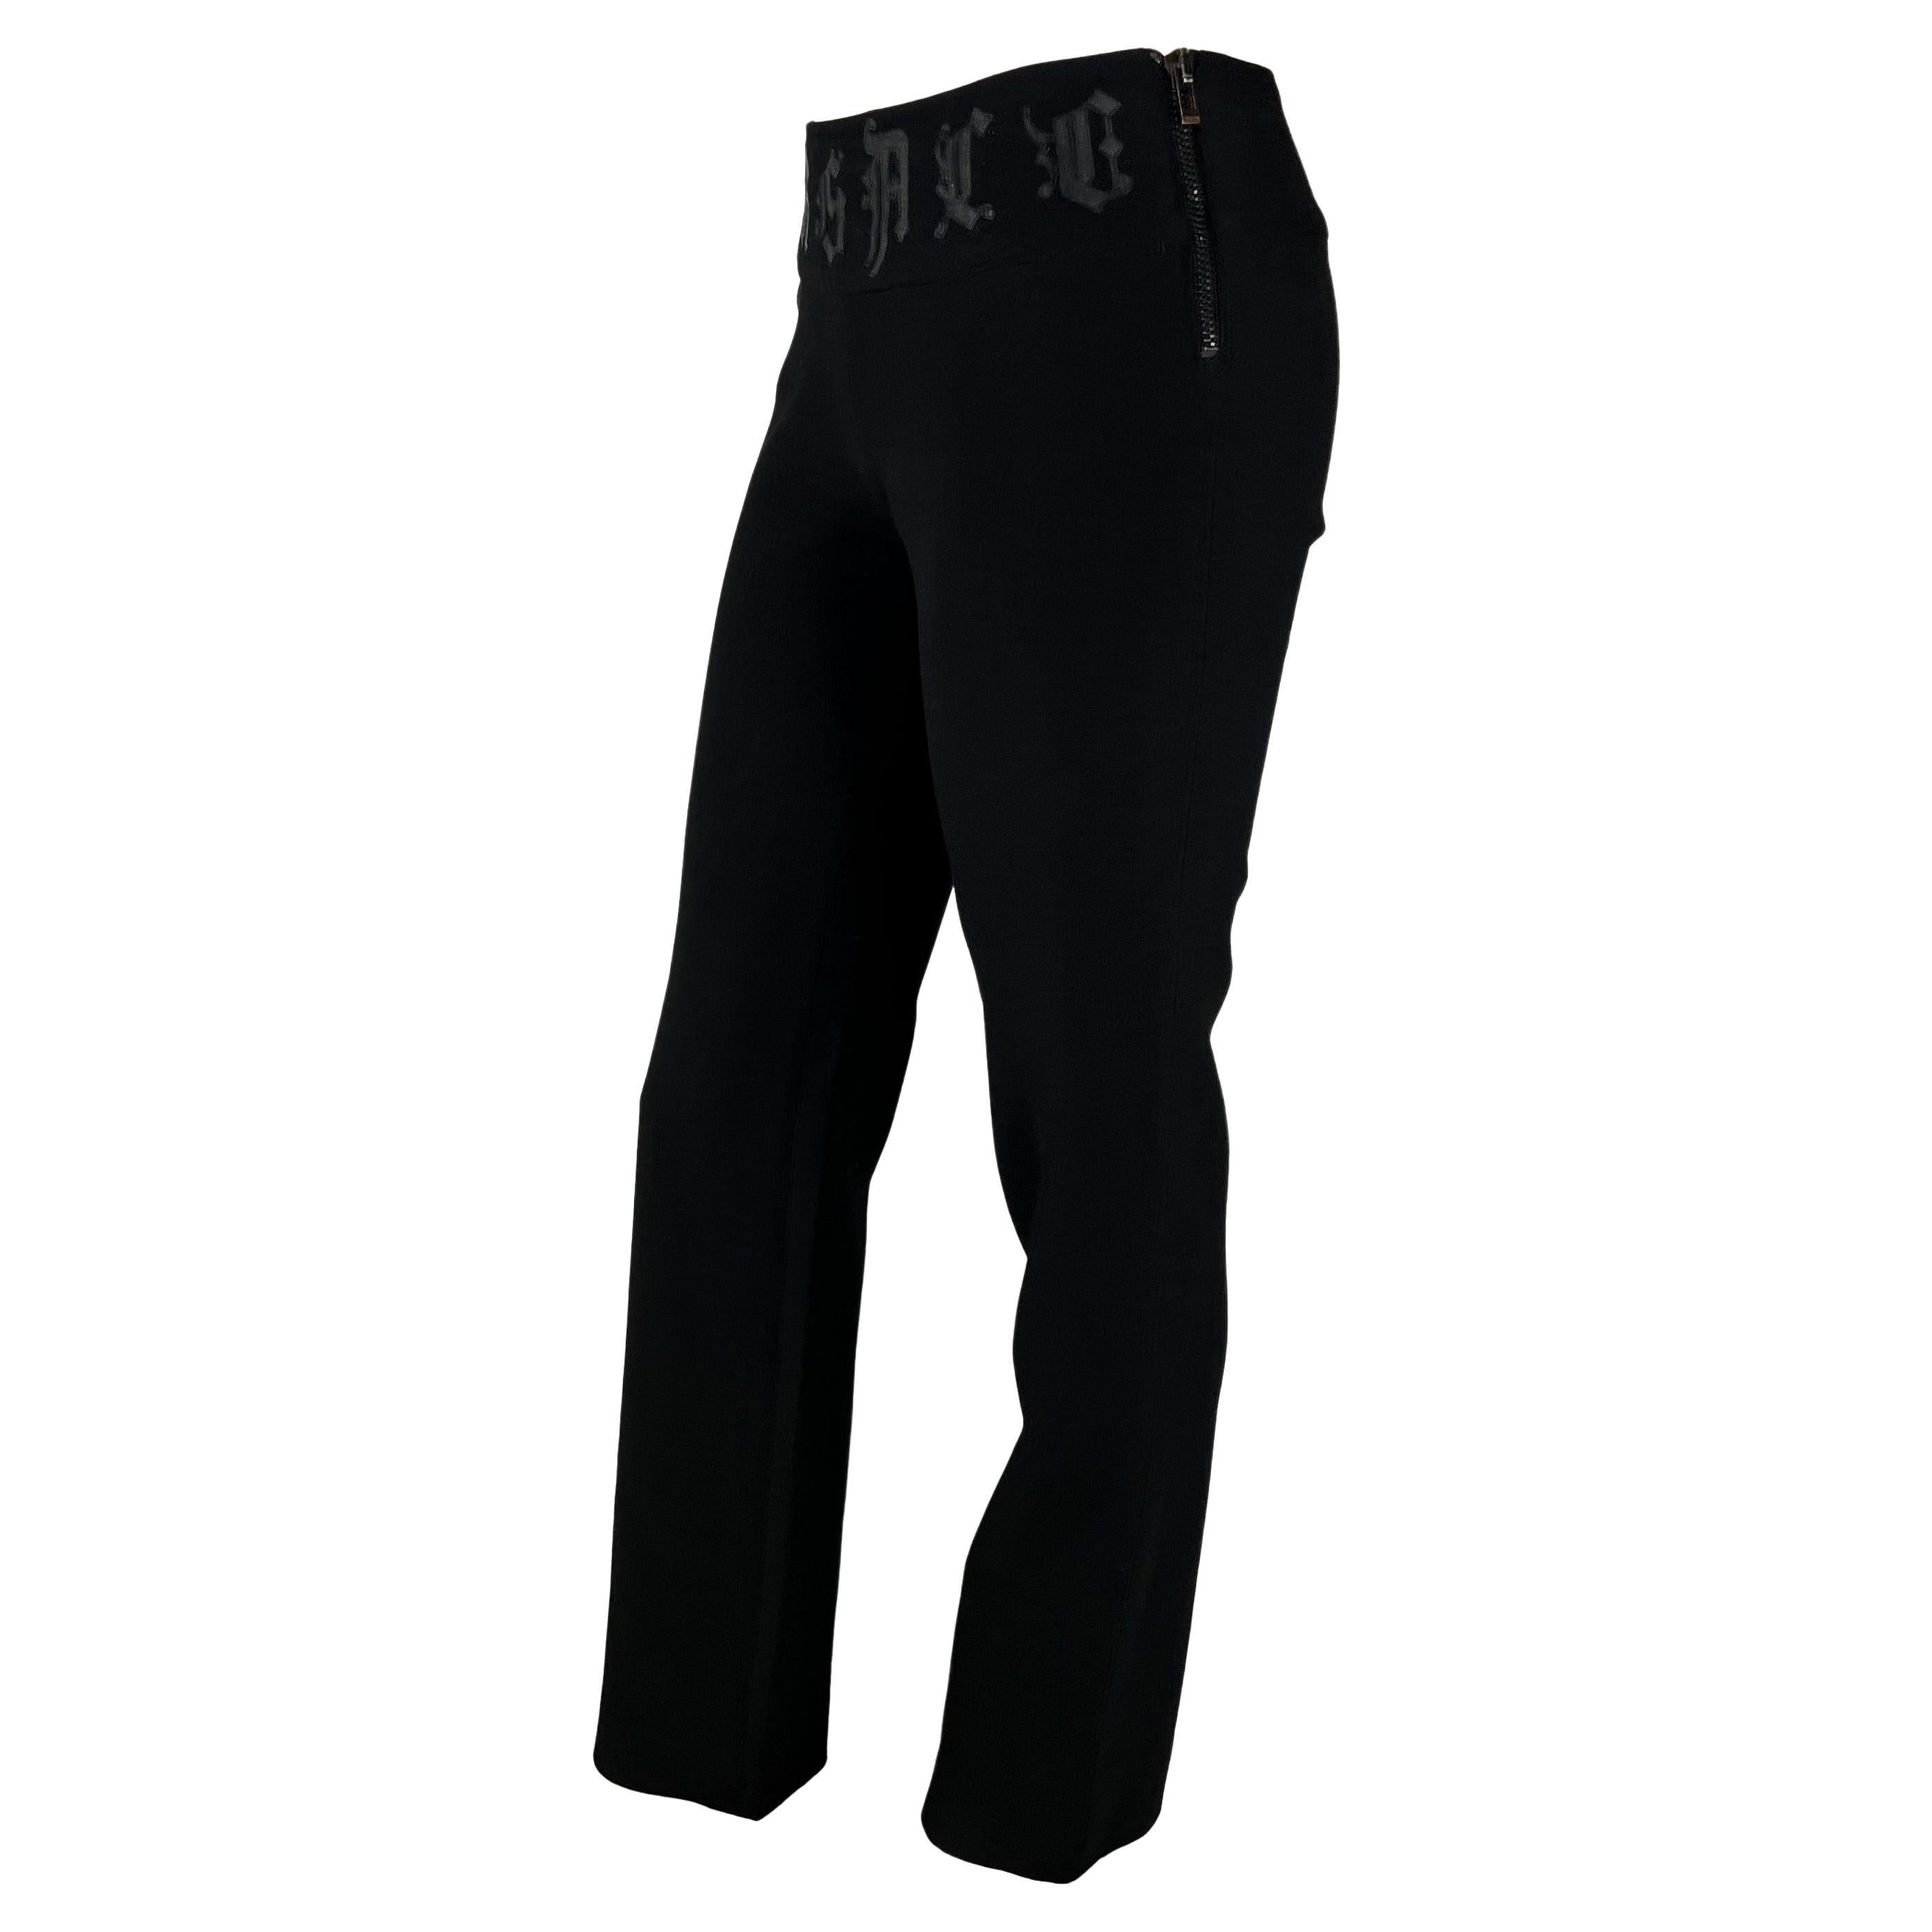 Presenting a fabulous black pair of Gianni Versace spell-out pants, designed by Donatella Versace. From the early 2000s, these wool pants feature 'Versace' spelled out on the front in leather appliqués. The pants are made complete with a zipper